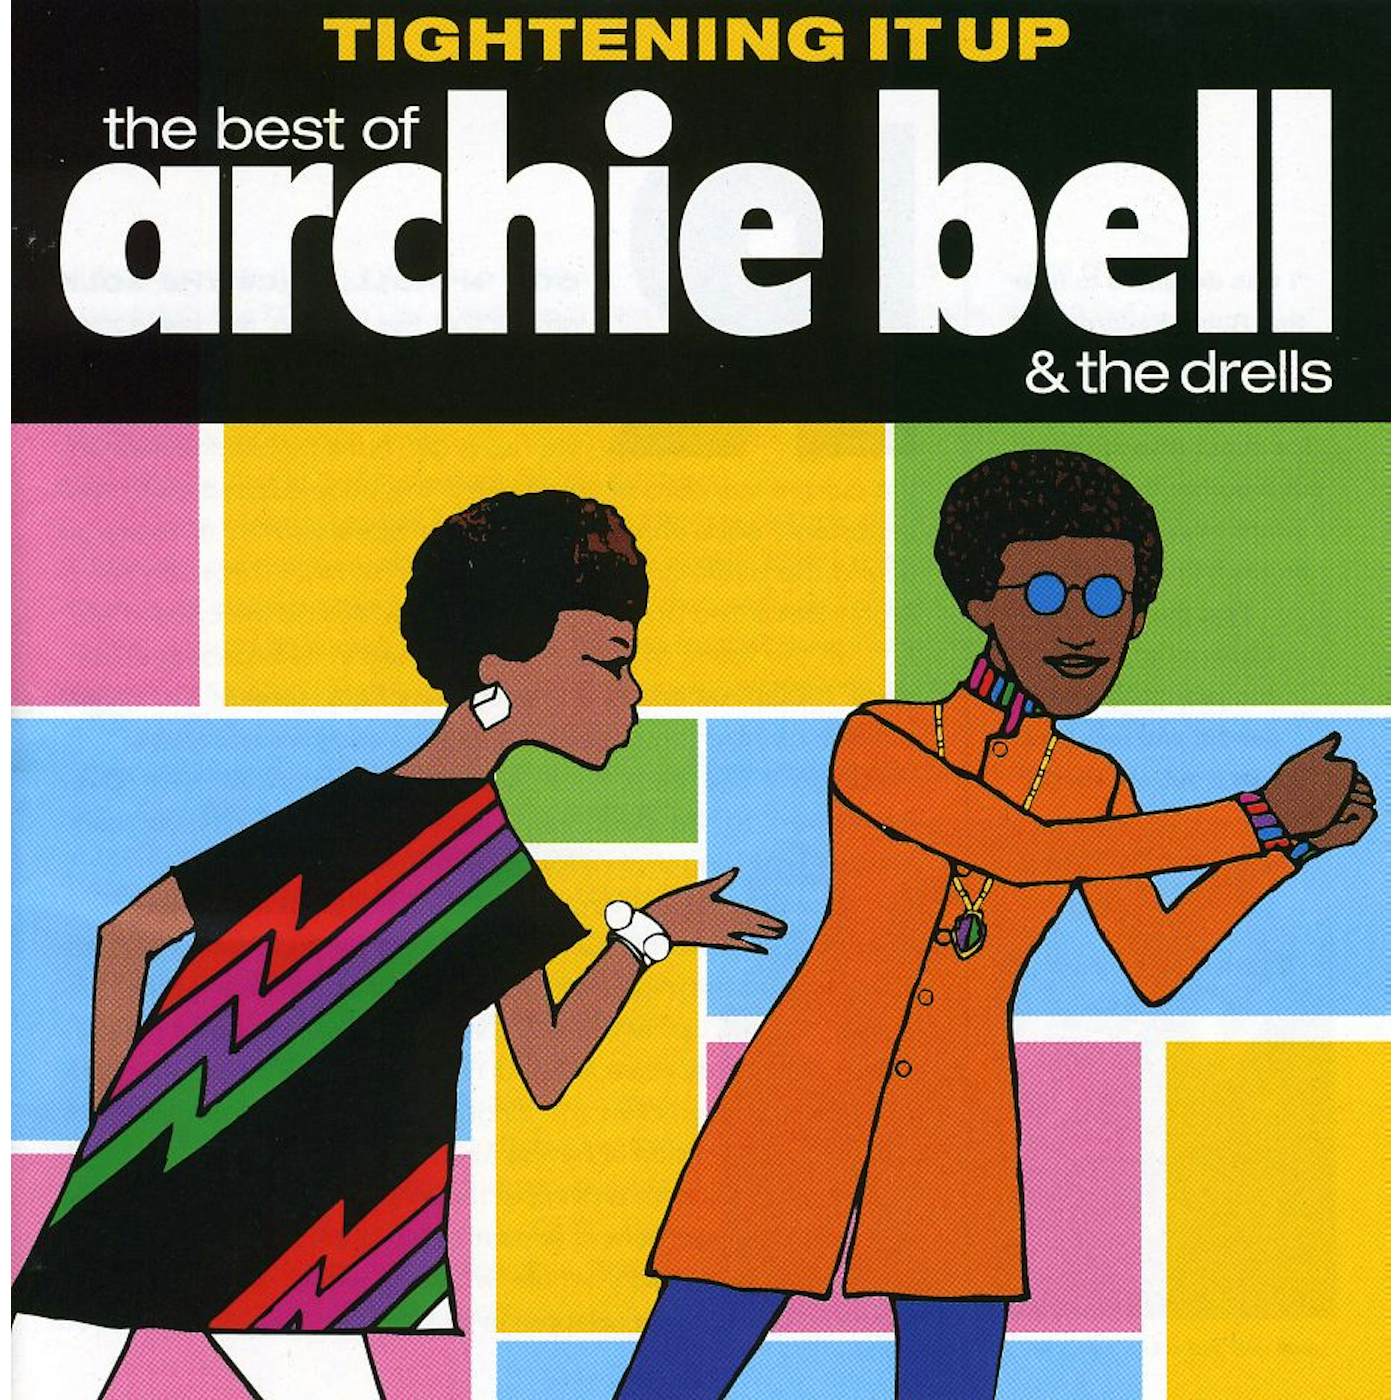 Archie Bell & The Drells TIGHTENING UP: BEST OF CD